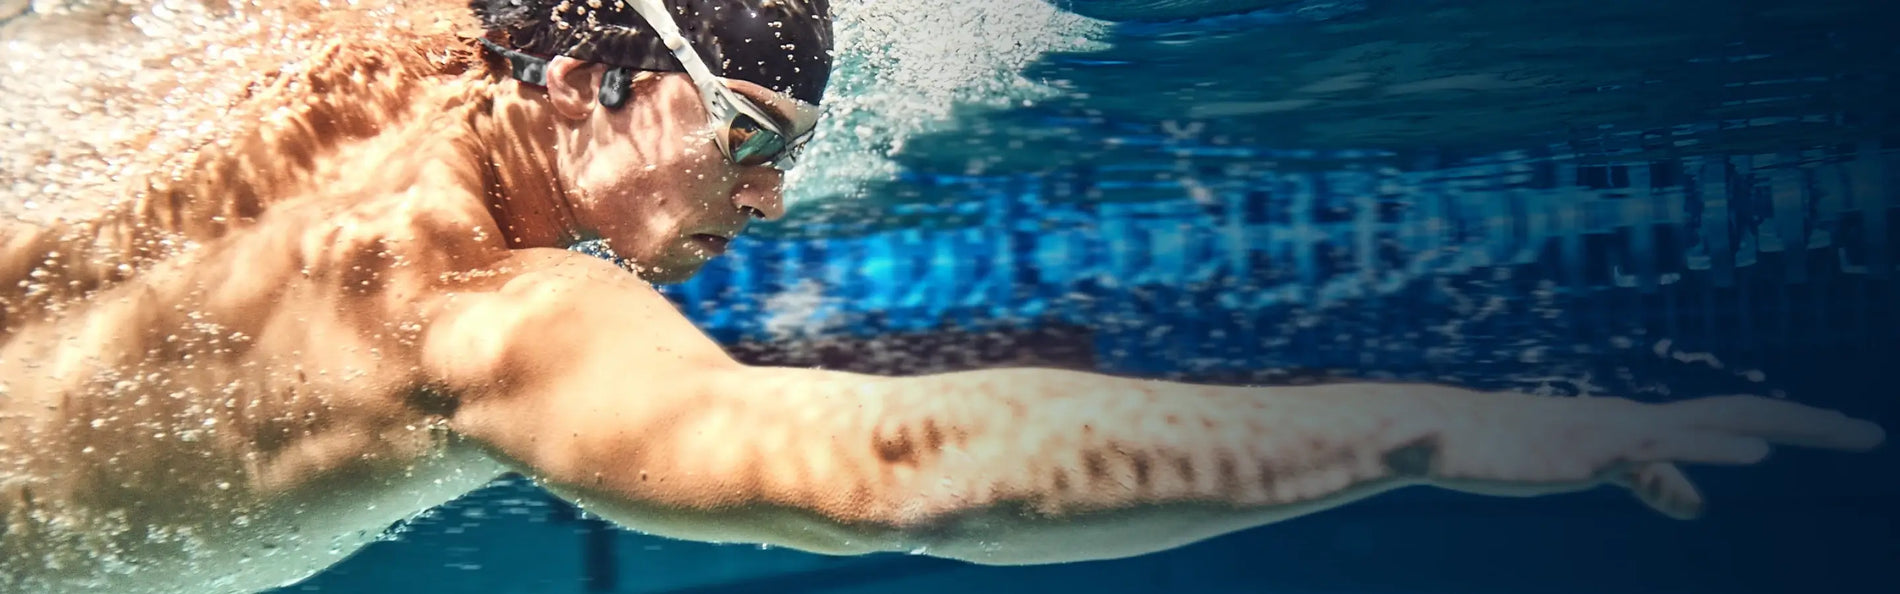 Designed For Swimmers Engineered to withstand all elements. OpenSwim is fully waterproof and submersible so you can swim, run, cycle, or train harder than ever before.